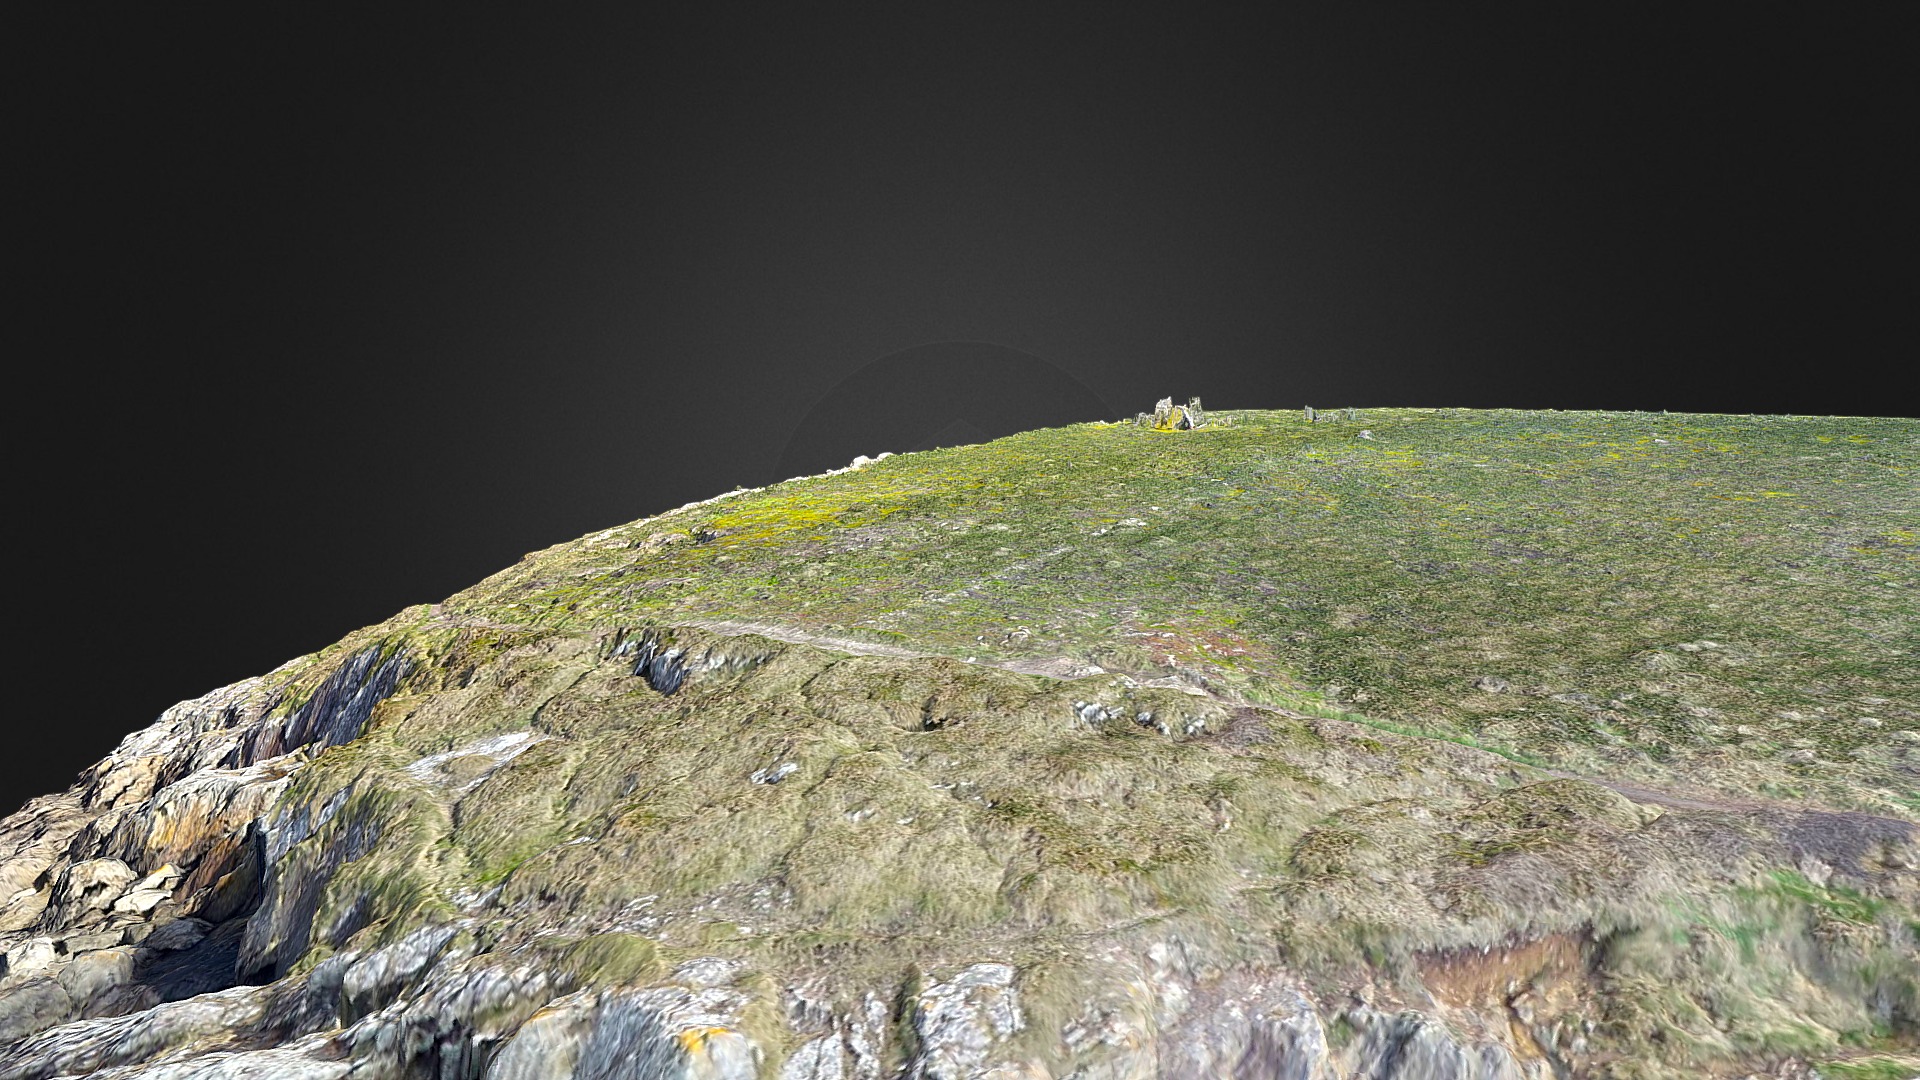 3D model Rock - This is a 3D model of the Rock. The 3D model is about a grassy hill with a couple people on it.